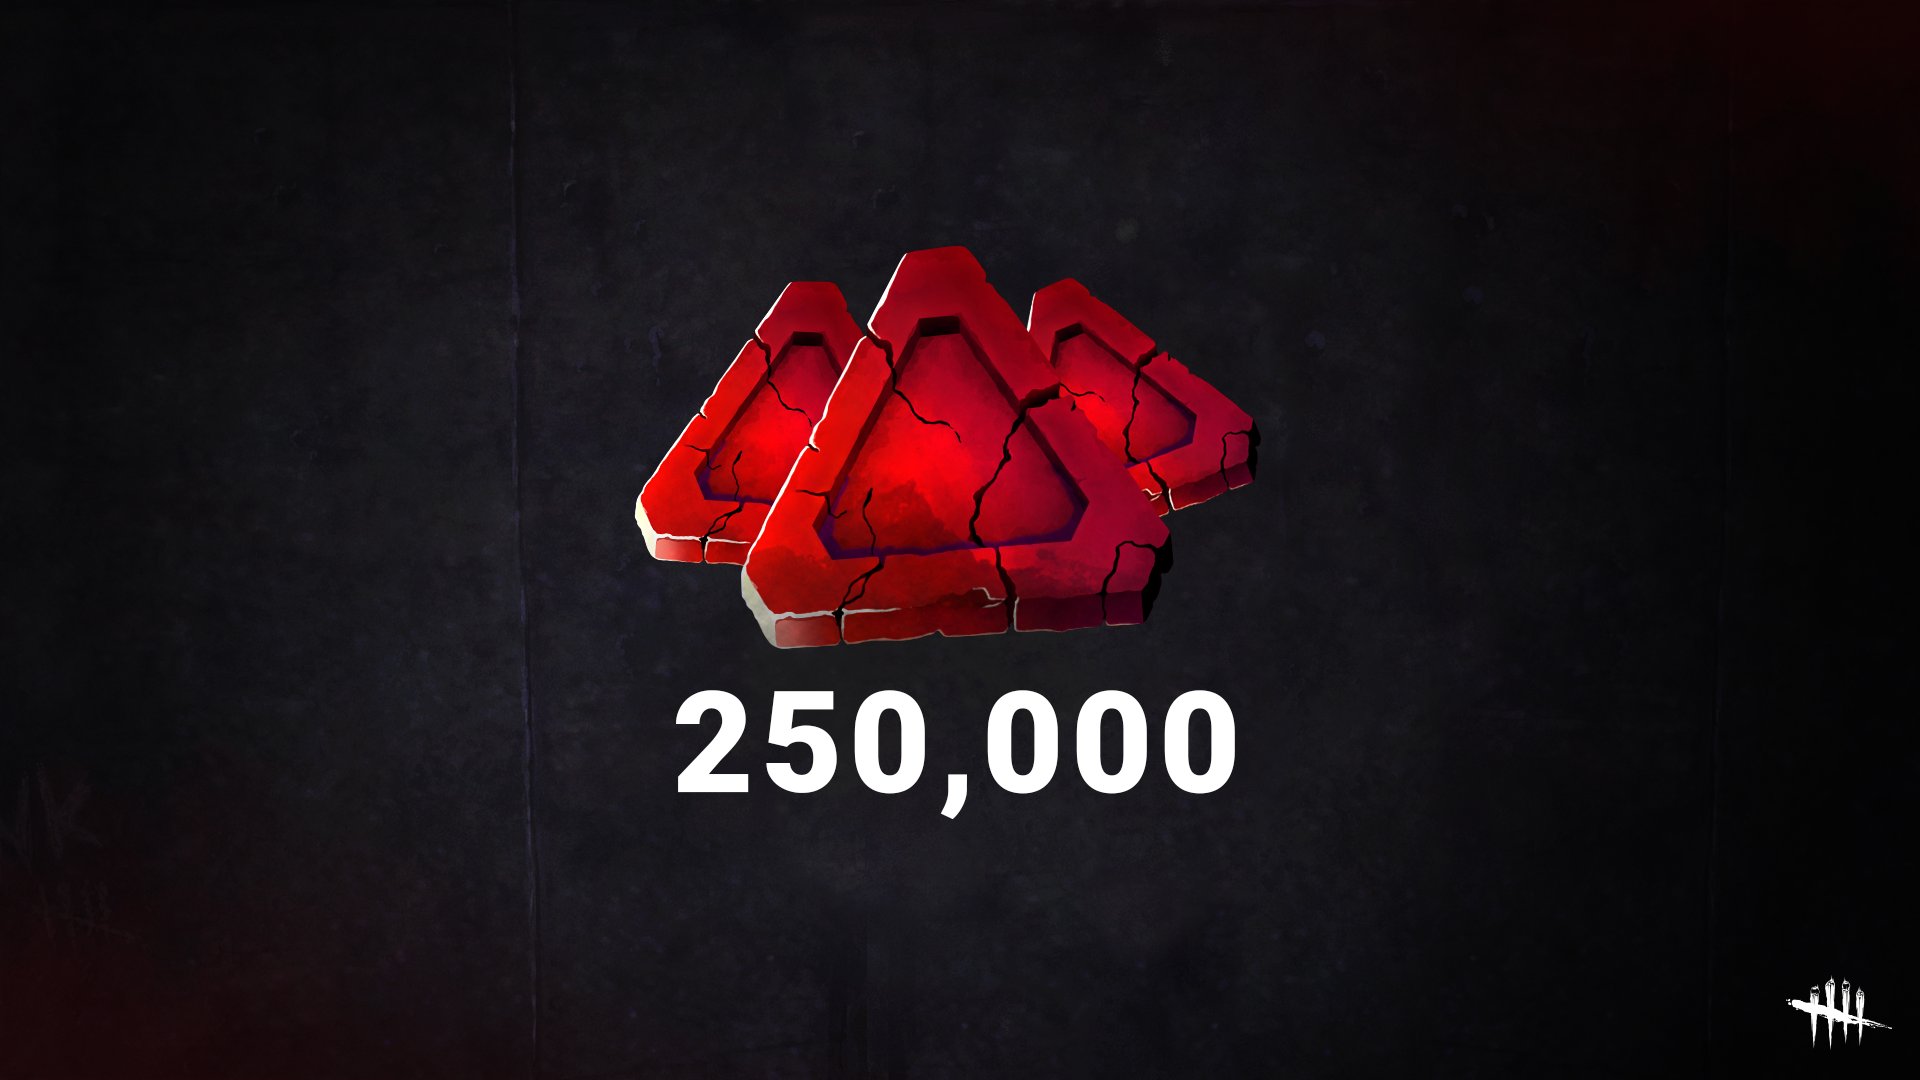 Magnum Opus Thanks For Sticking With Us As We Work On The Remaining Error Codes 111 112 Login For 250k Bloodpoints On Us Deadbydaylight Dbd T Co 5ypu451phz